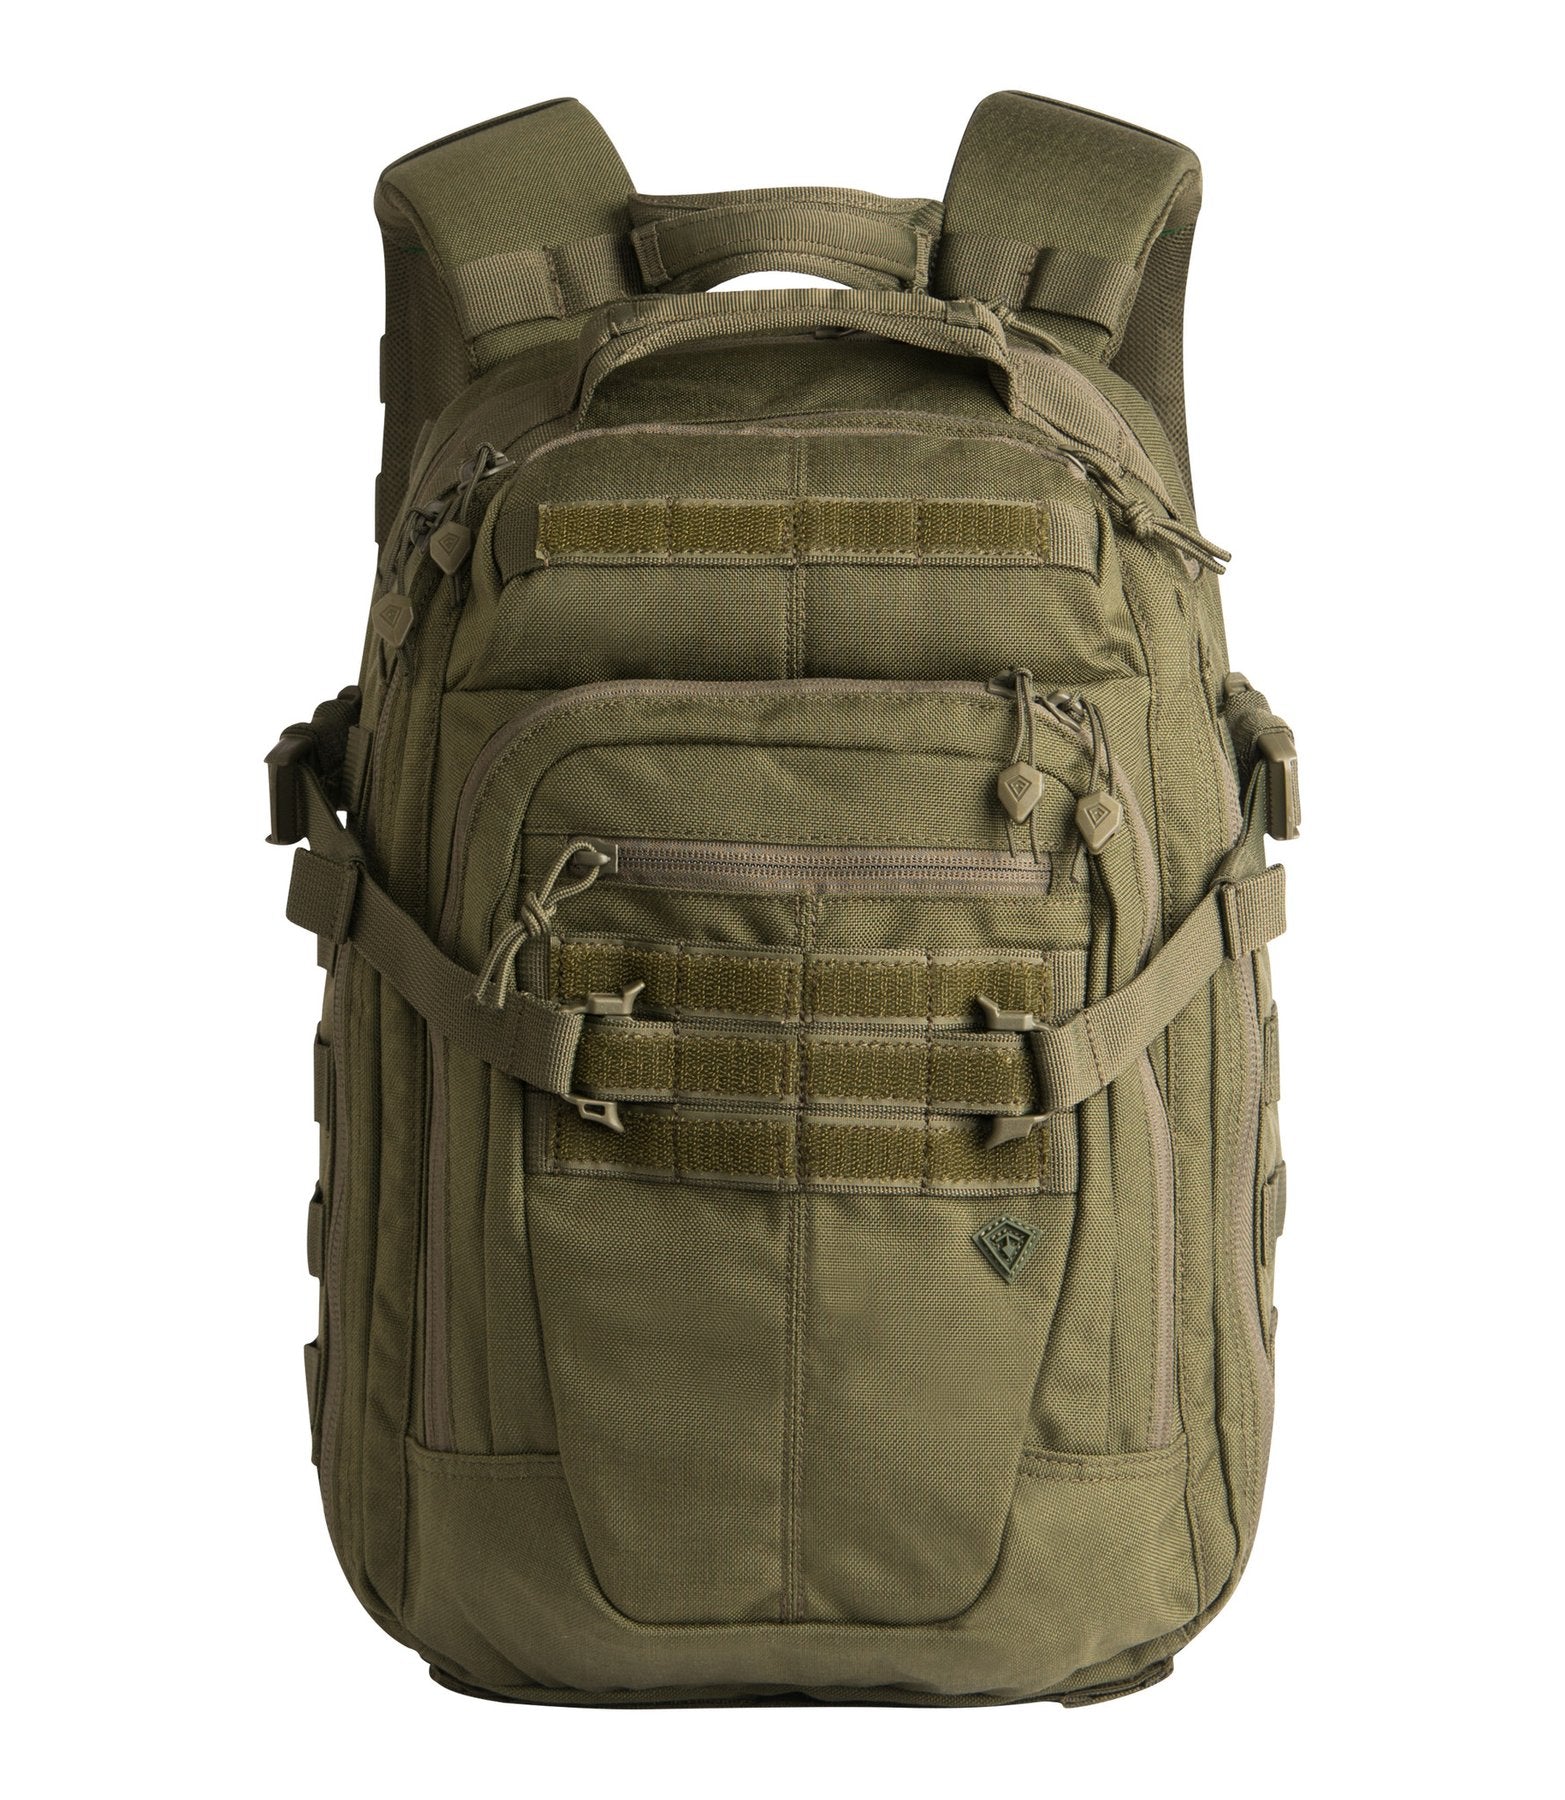 Specialist Half-Day Backpack 25L (180006) Black, Coyote, OD Green